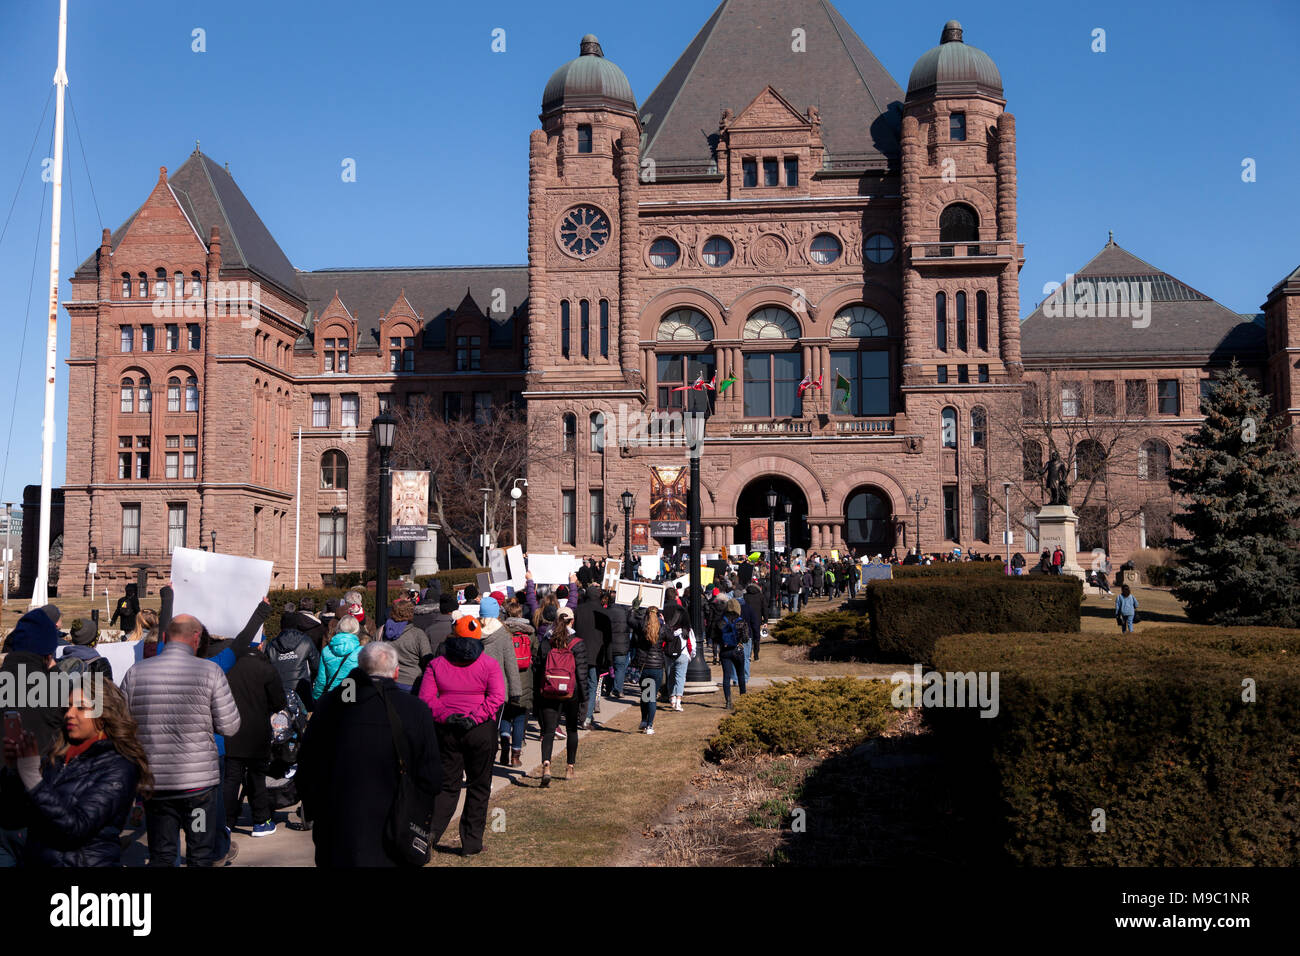 Toronto, Ontario, Canada. 24th March, 2018. Protestors calling for an end to gun violence march in Toronto, Ontario, Canada on March 24, 2018. The protest was part of the March For Our Lives moment taking place in cities across North America in response to the February shooting at Marjory Stoneman Douglas High School in Florida where 17 students were shot dead. Credit: Mark Spowart/Alamy Live News Stock Photo